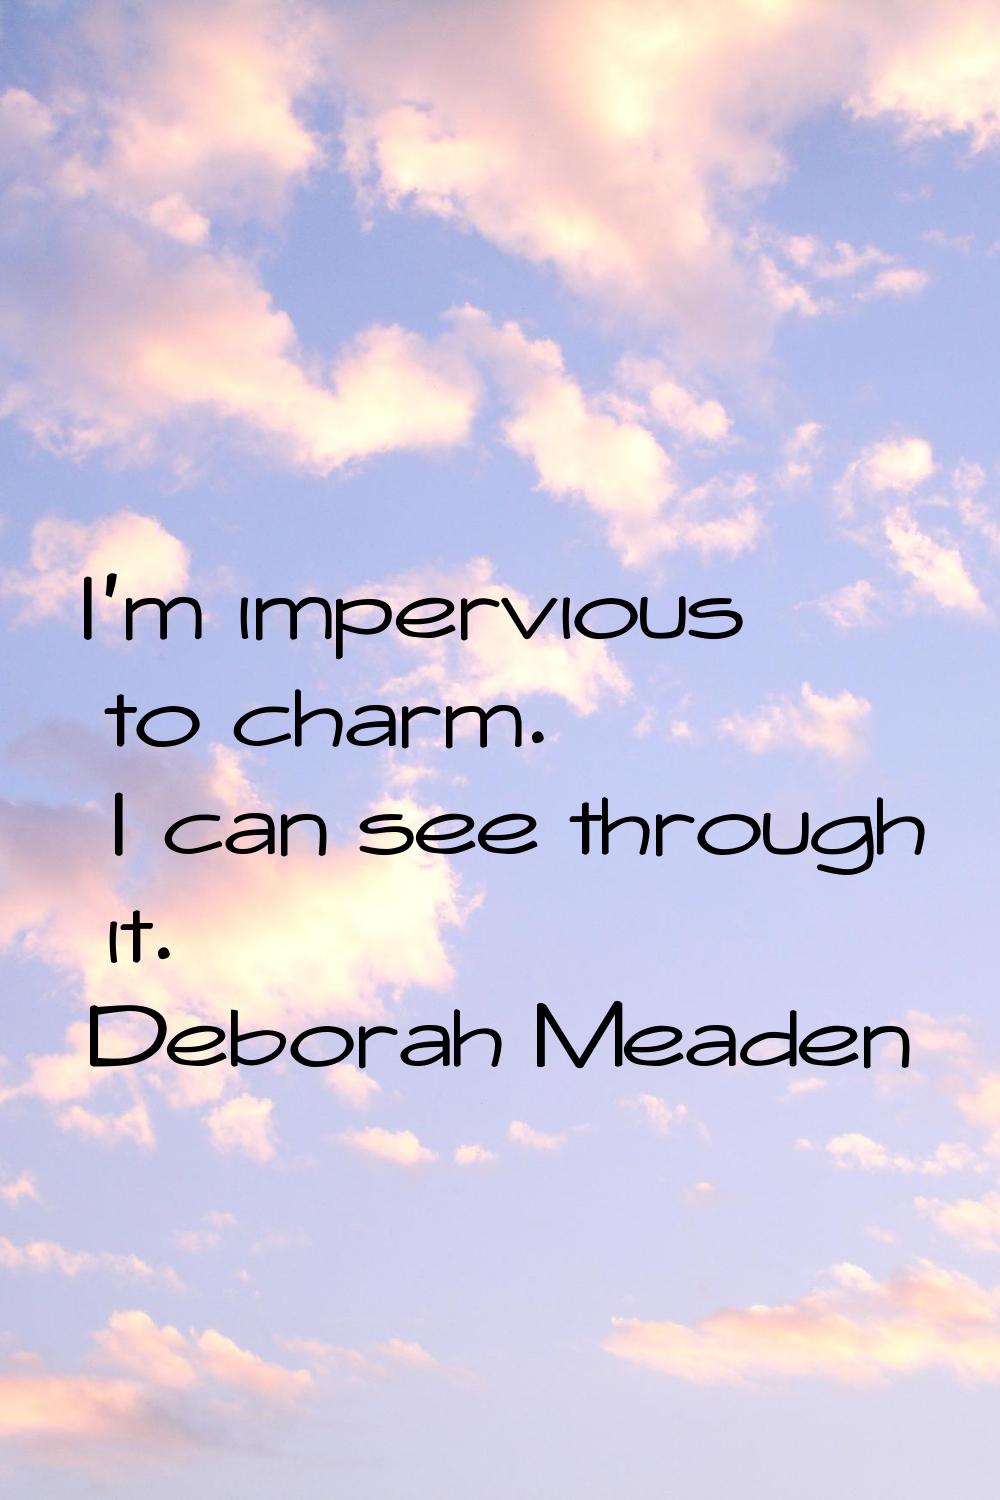 I'm impervious to charm. I can see through it.